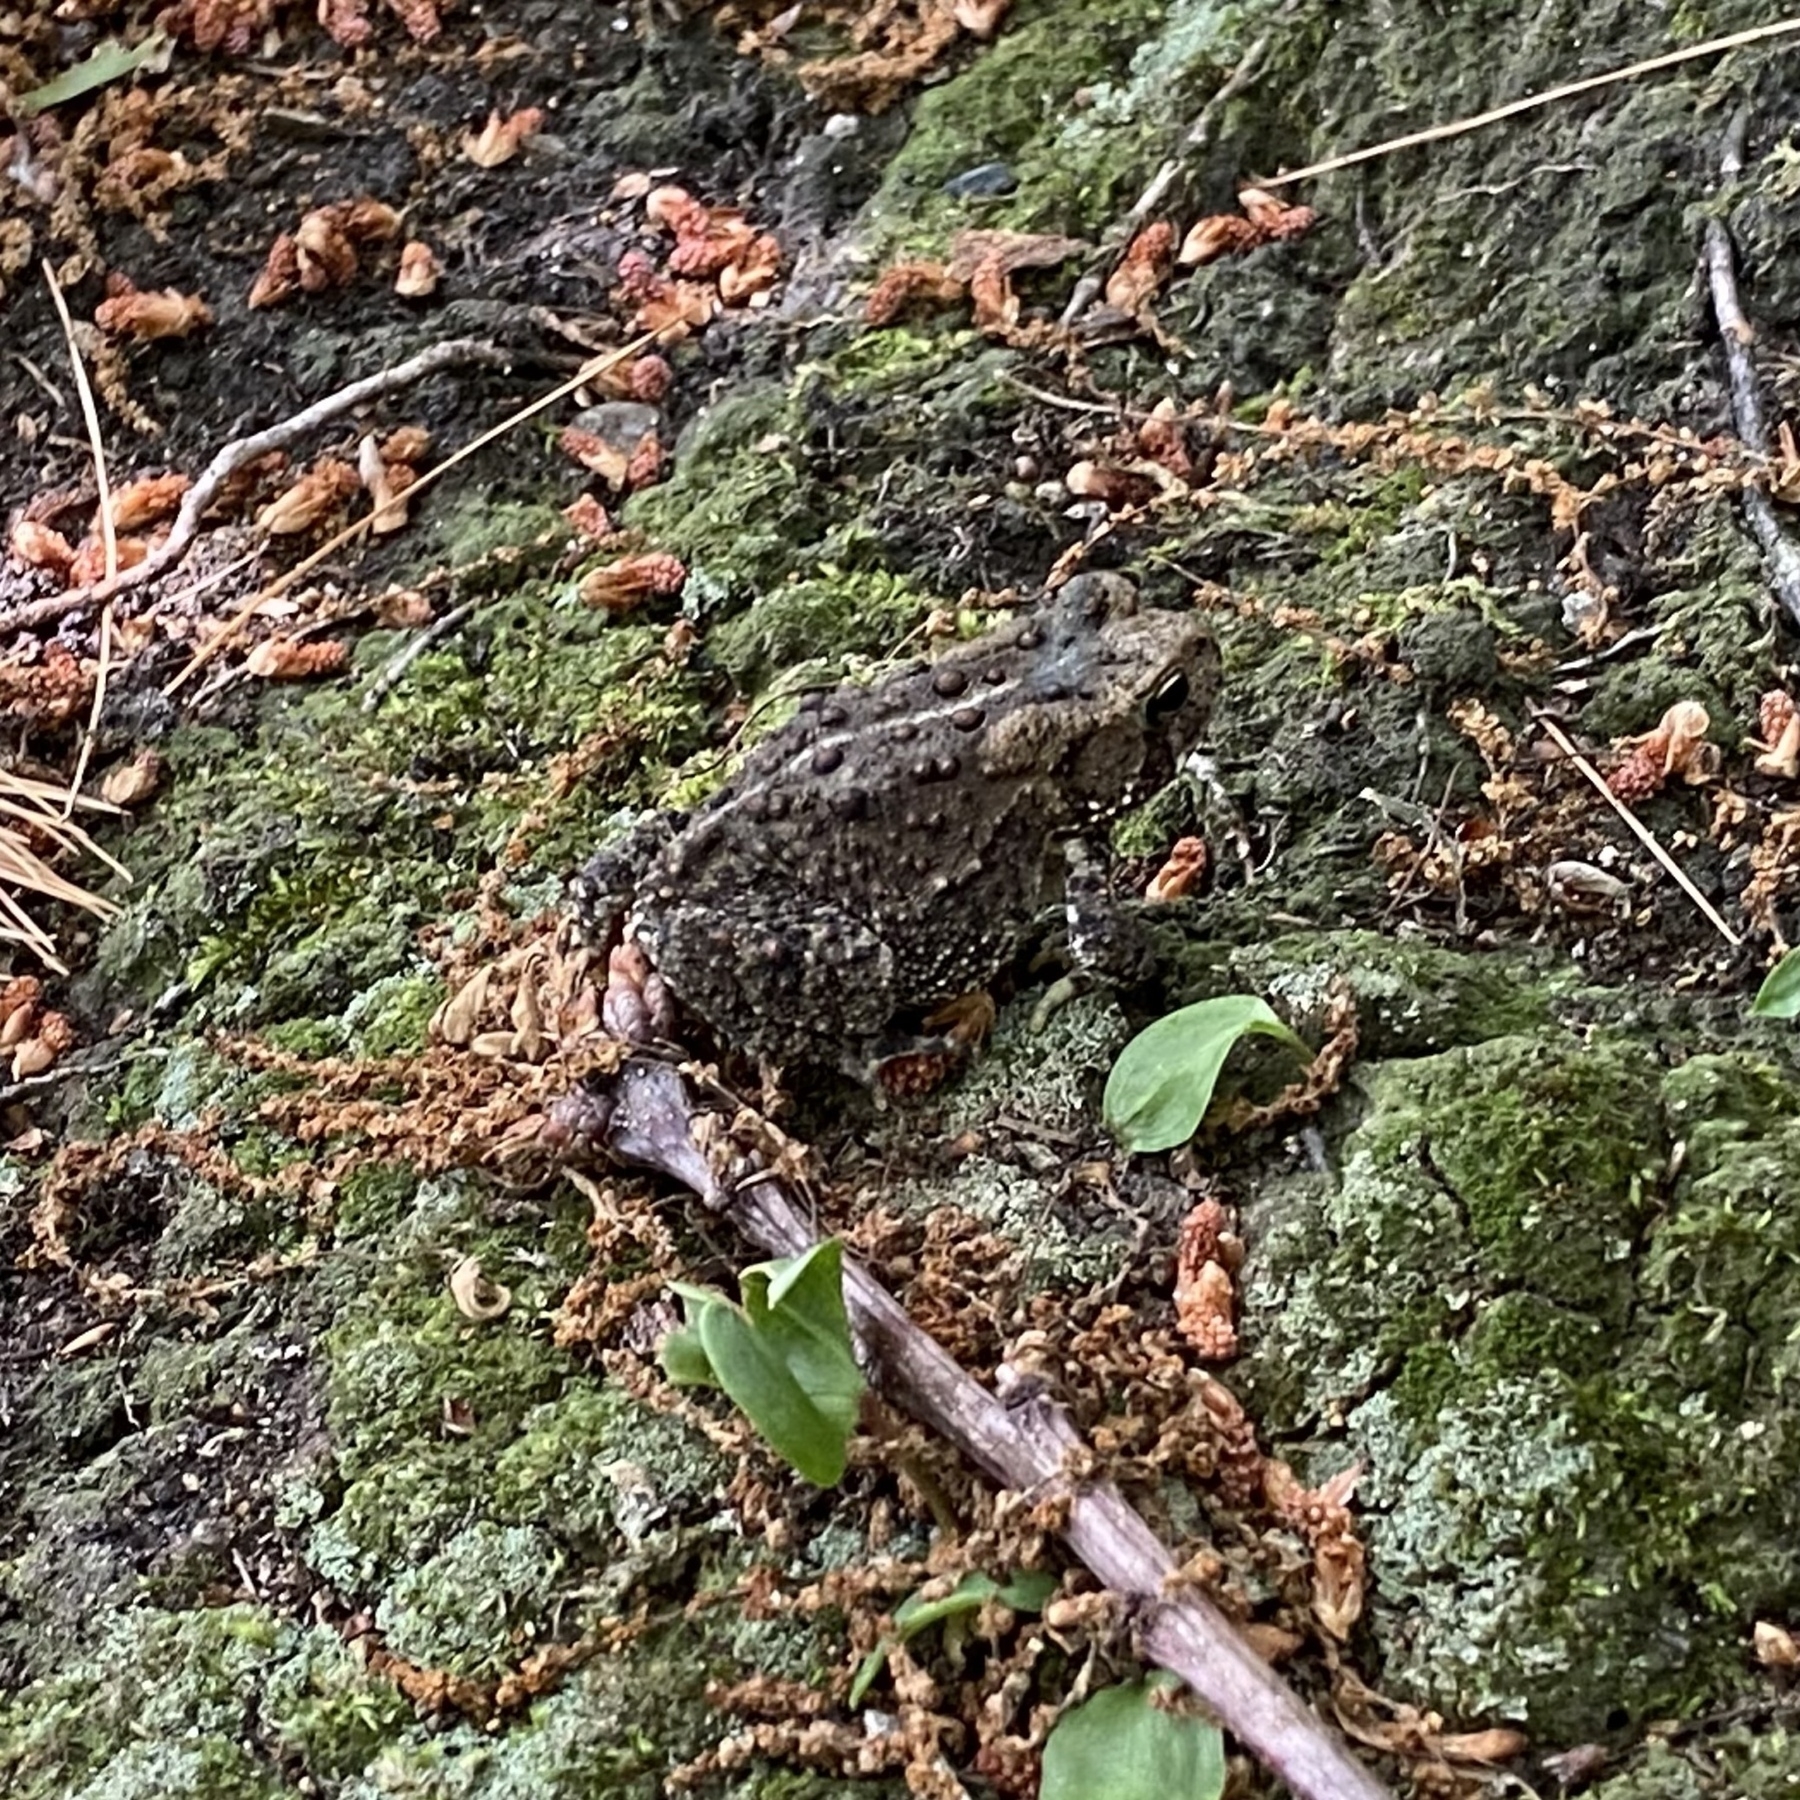 Close up view of a small toad sitting on the mossy forest floor.